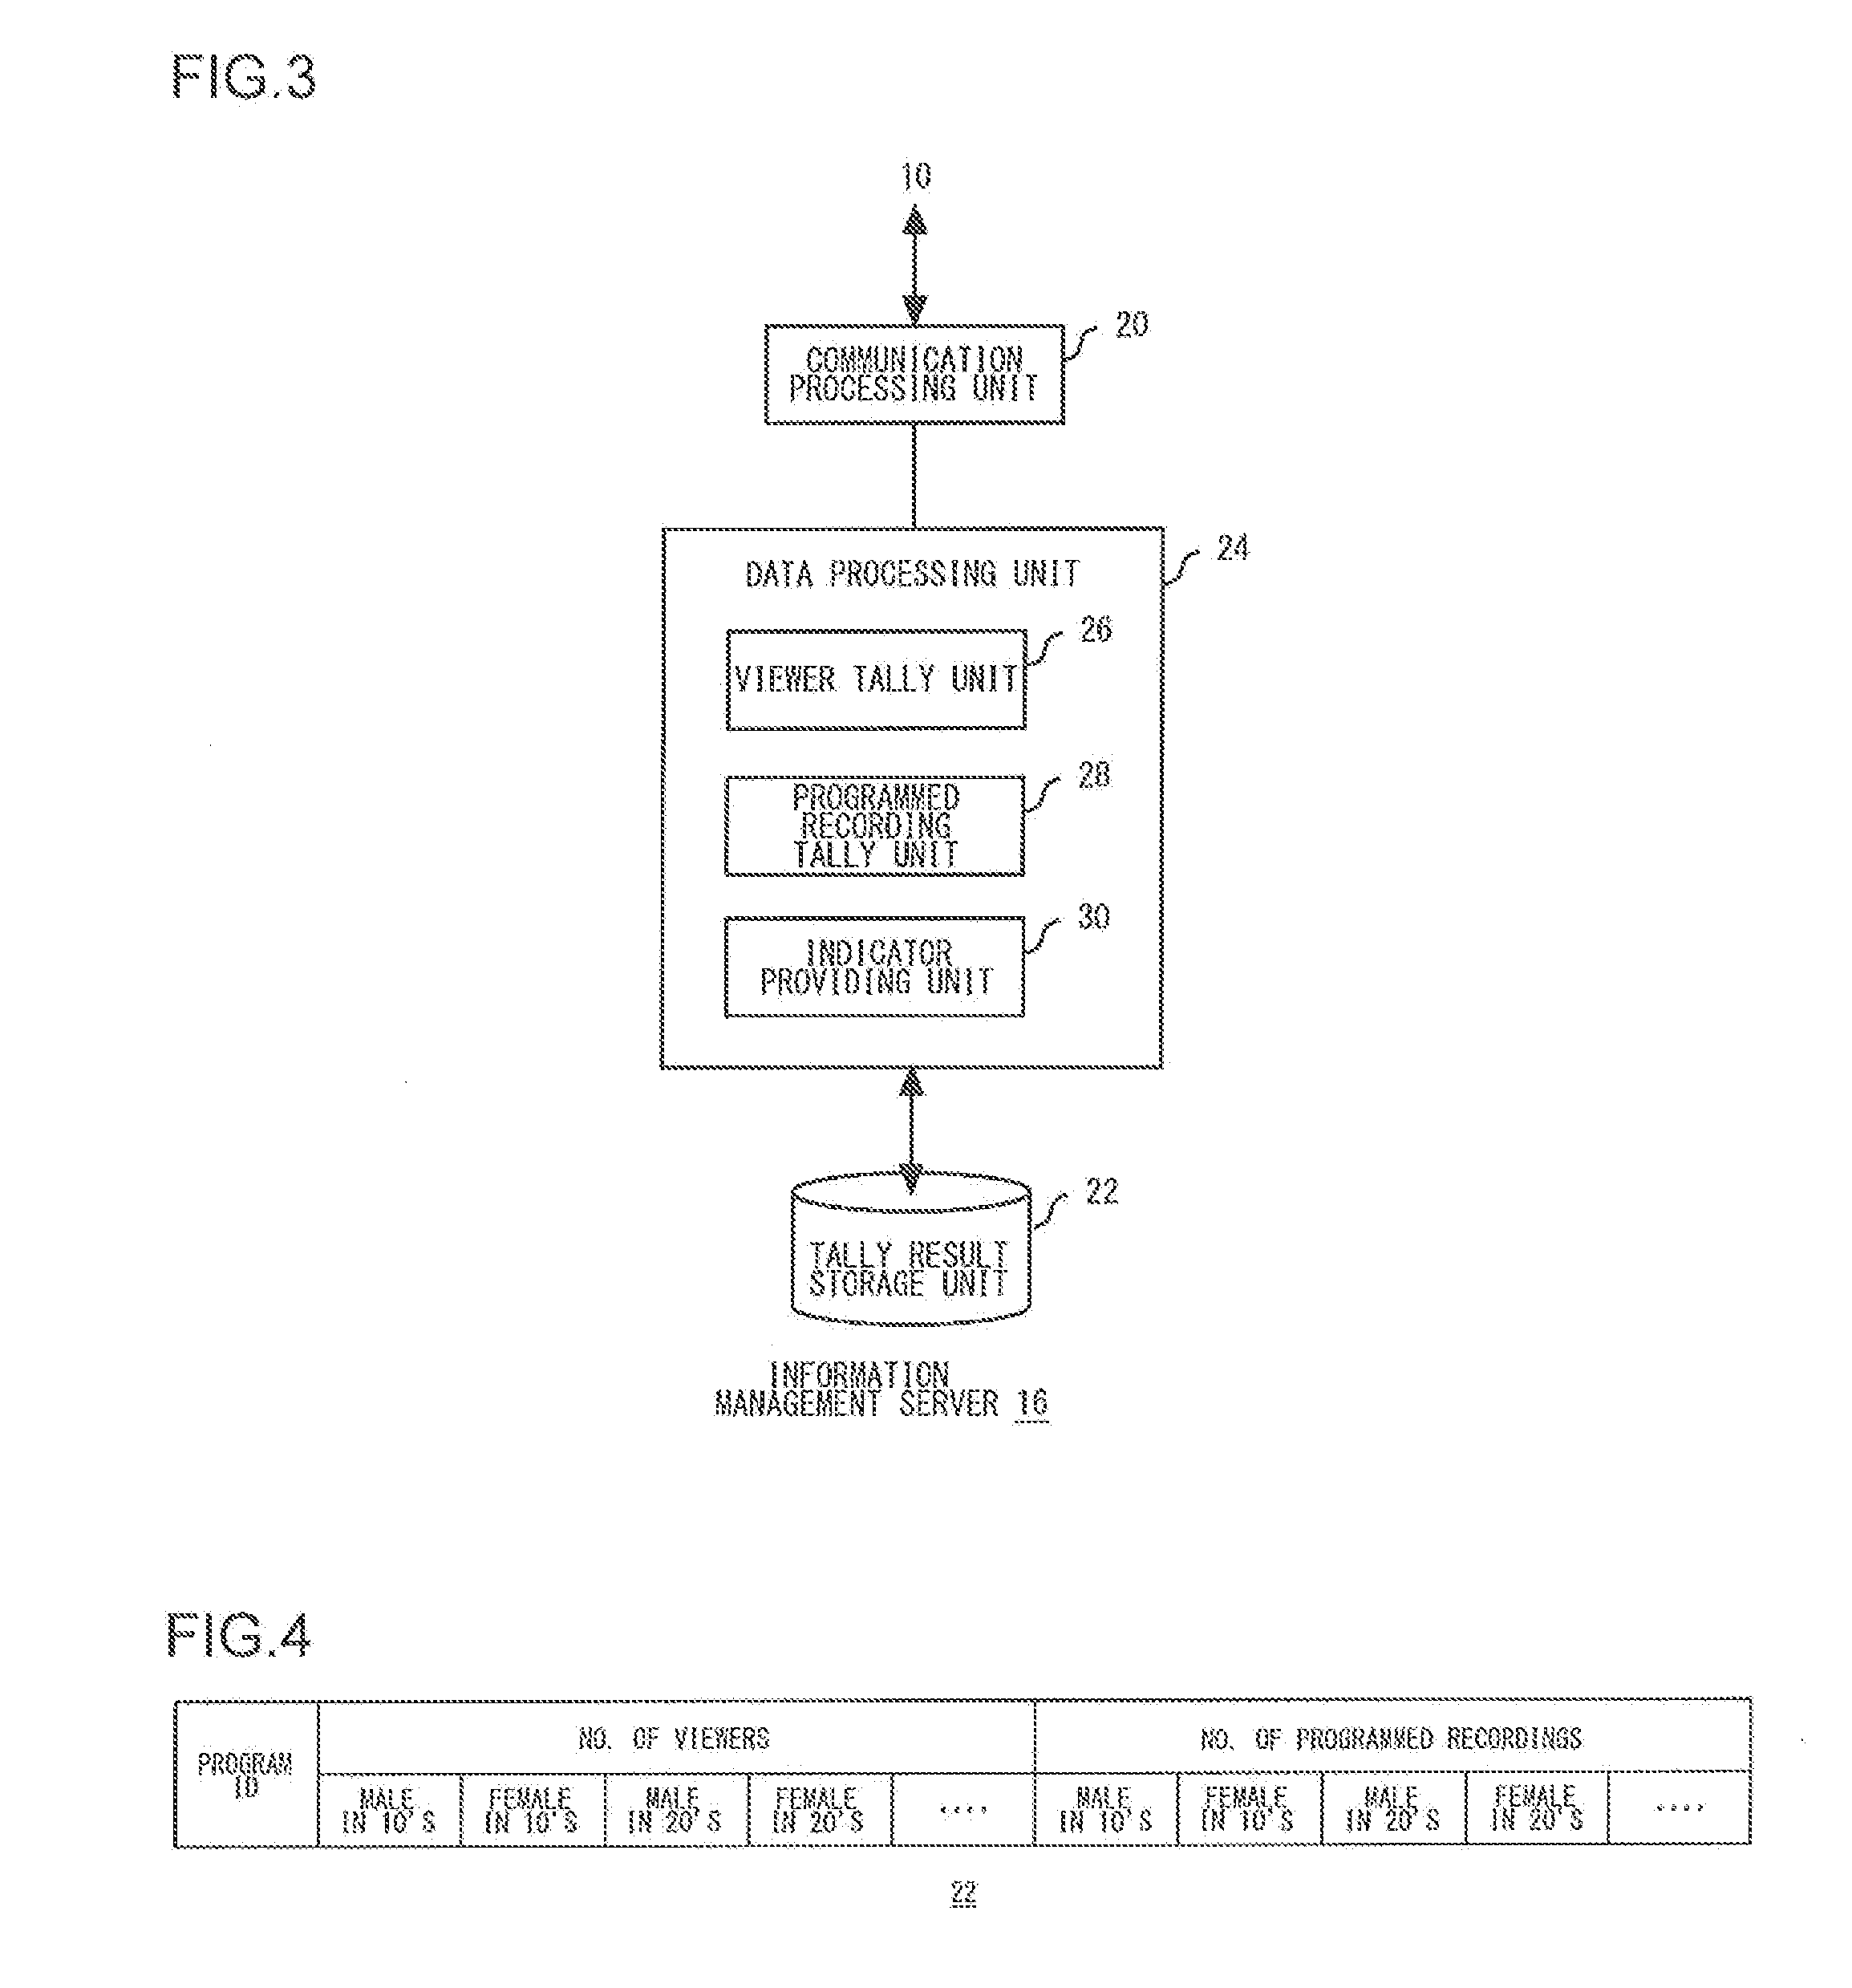 Information Processing Apparatus, Tuner, And Information Processing Method